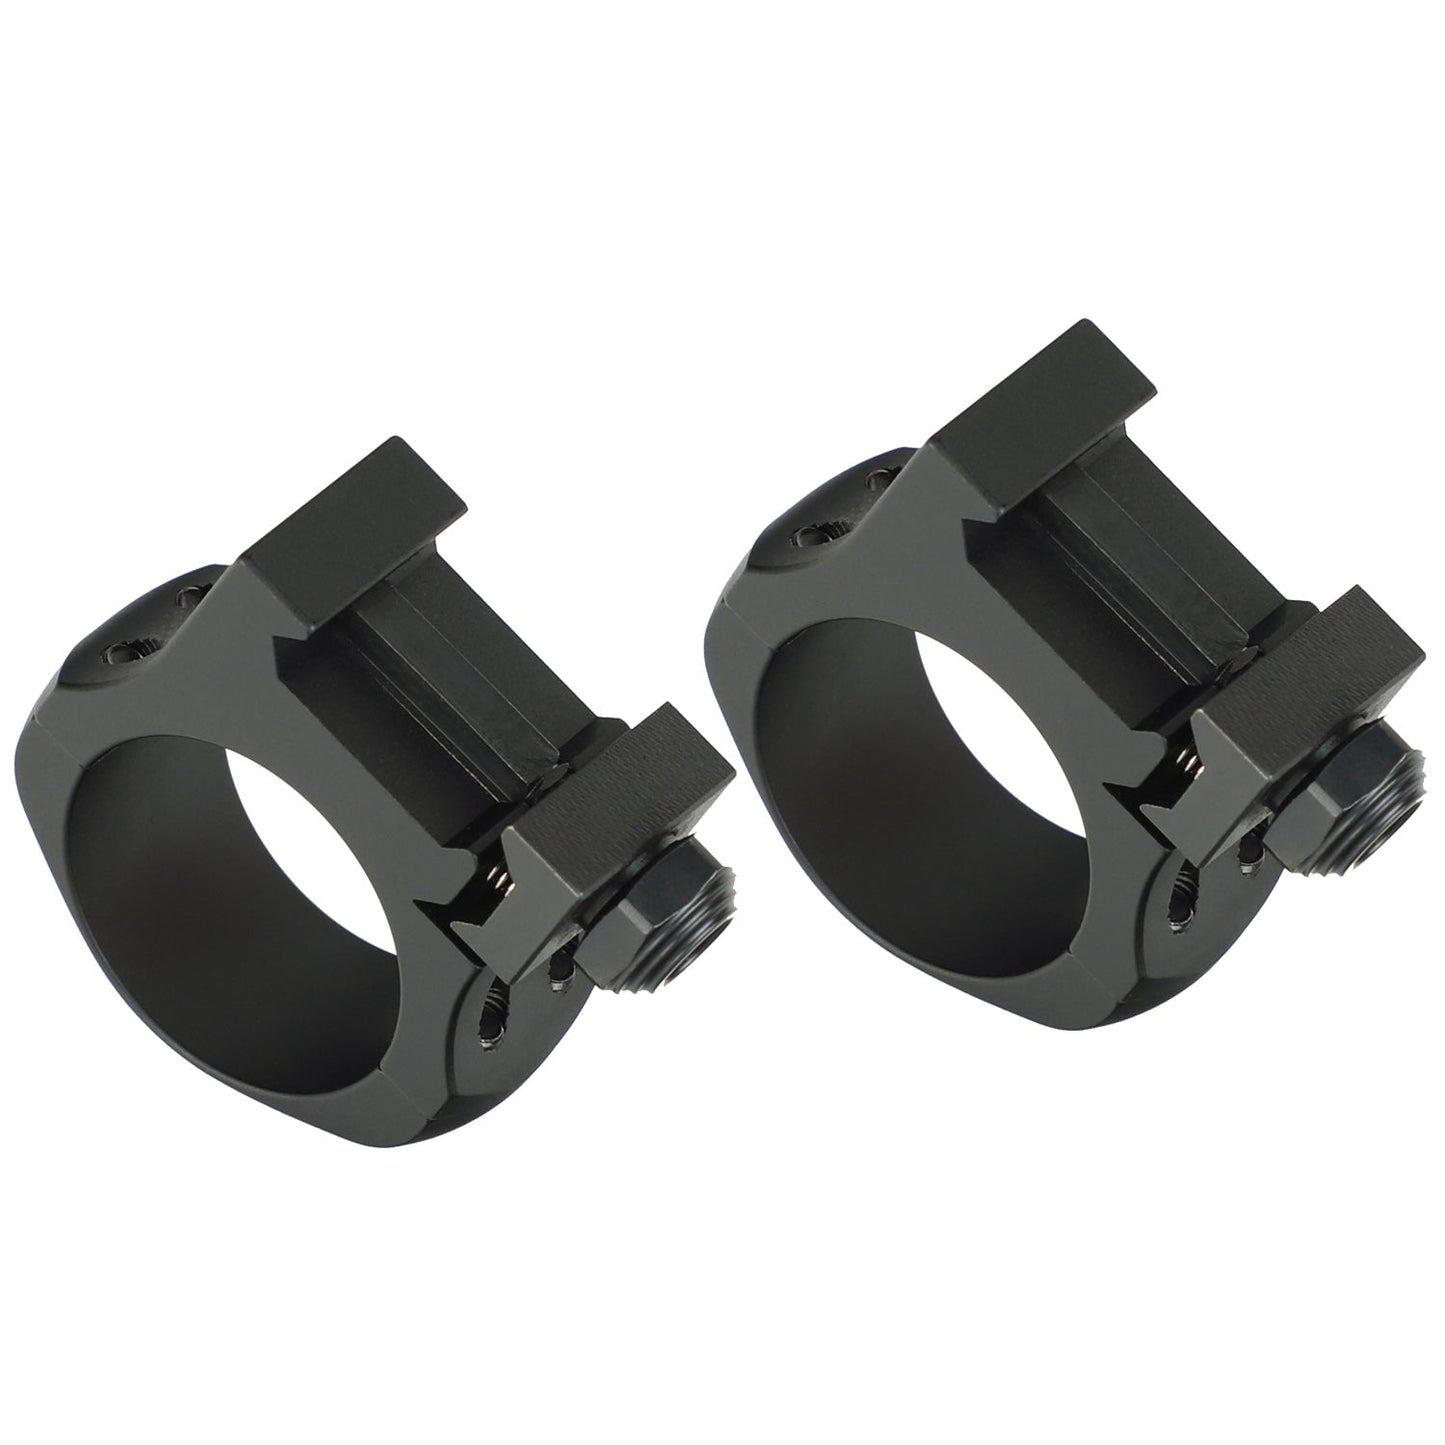 ohhunt® Pro 7075 Aluminum 30mm Scope Rings Type lll Hardcoat Anodized - Low Med High Profile